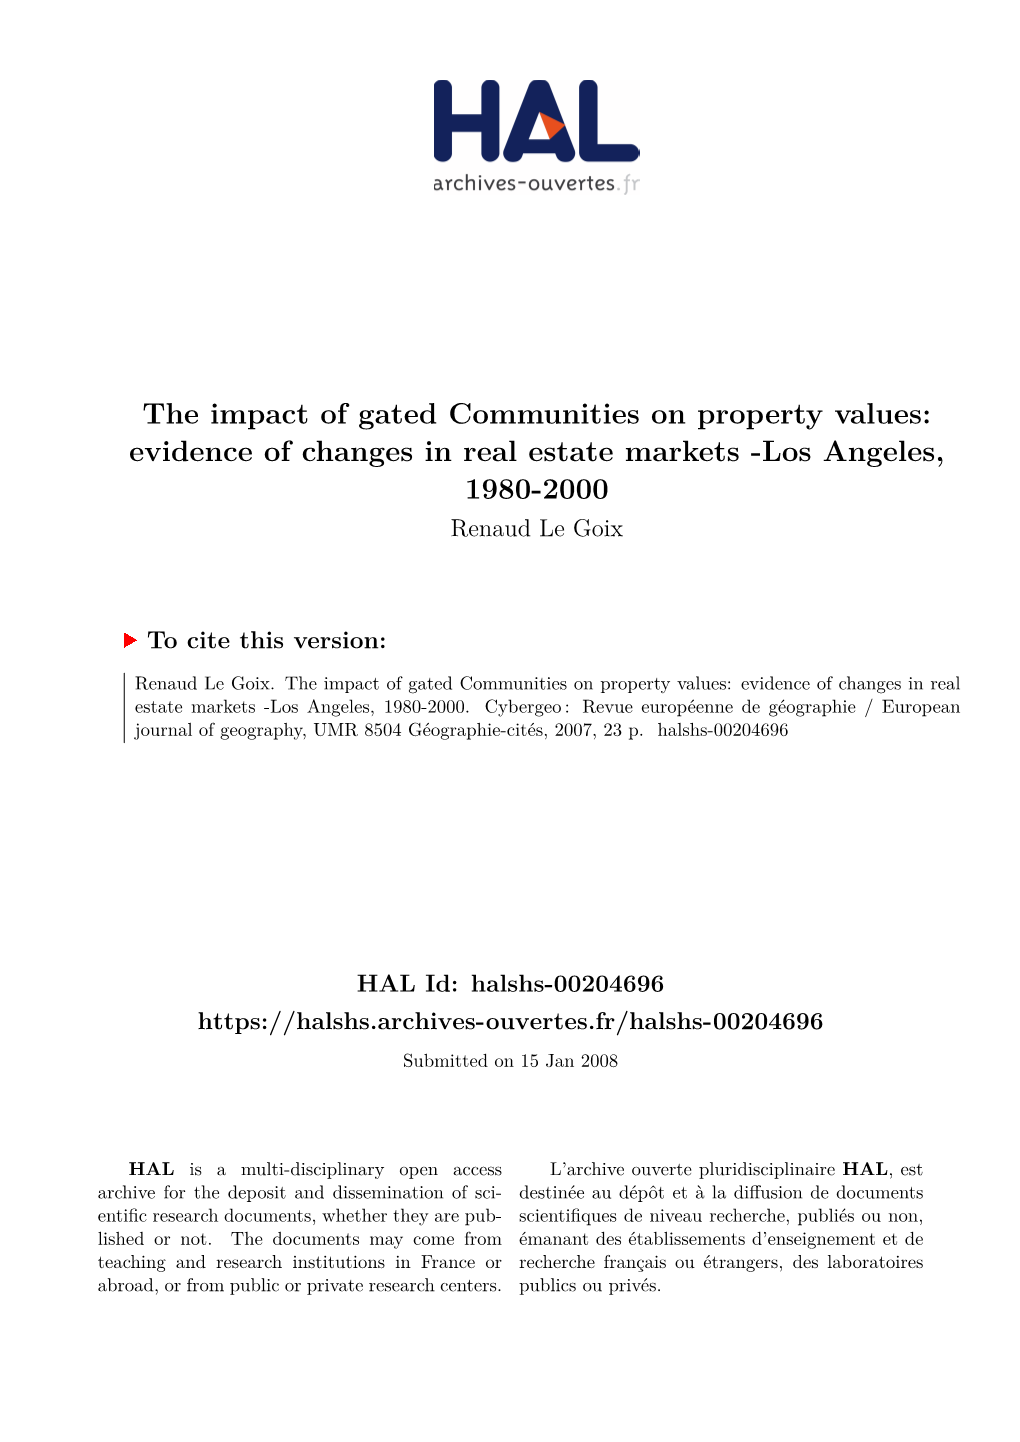 The Impact of Gated Communities on Property Values: Evidence of Changes in Real Estate Markets -Los Angeles, 1980-2000 Renaud Le Goix